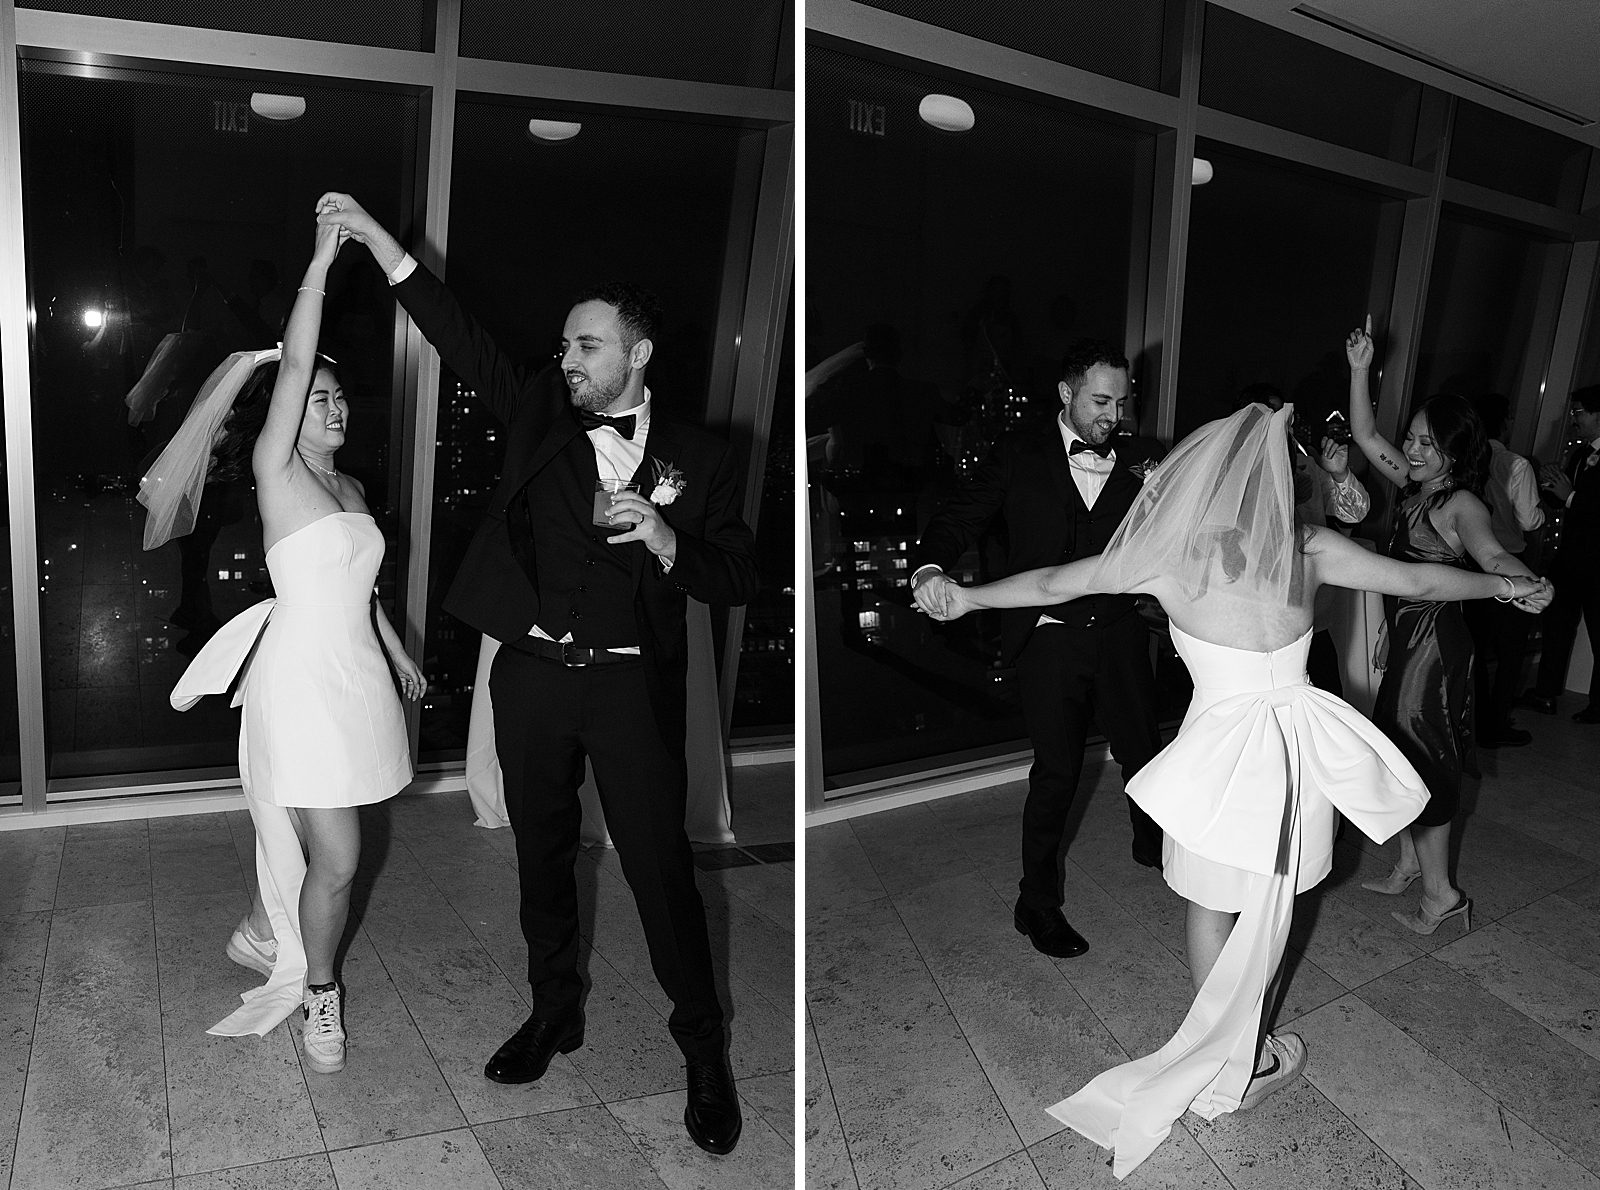 Left photo: Black and white shot of the groom twirling the bride on the dancefloor. 
Right photo: Black and white shot of the bride and groom dancing together on the dancefloor. 